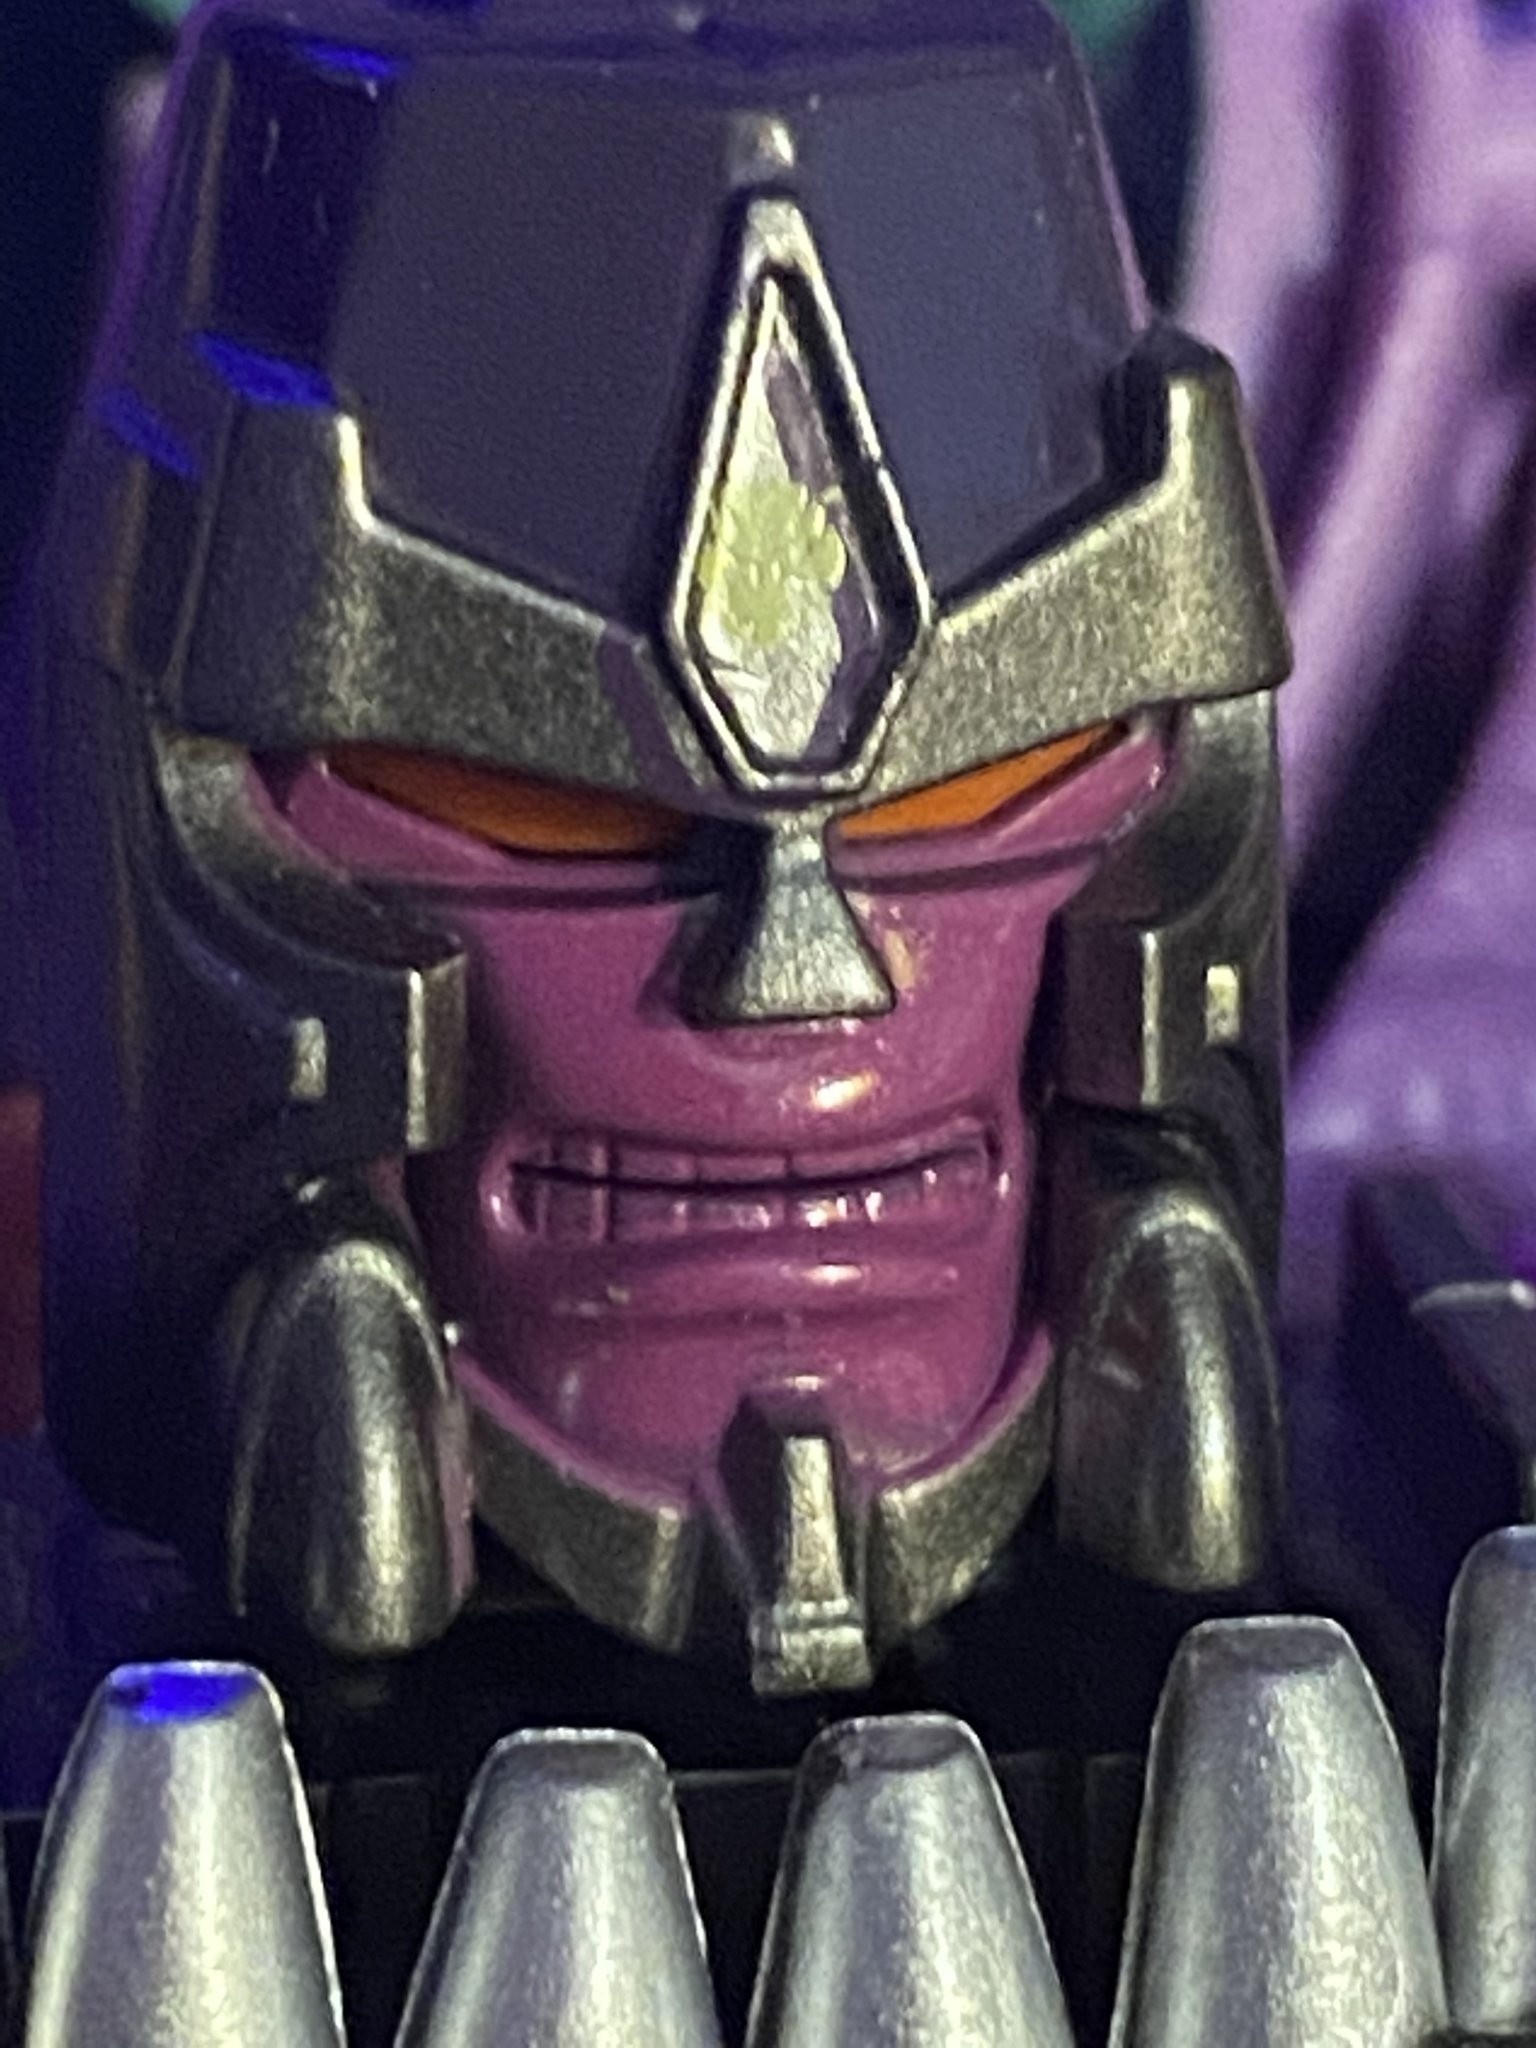 Transformers News: Images of Variant Headsculpt for Kingdom Beast Wars Megatron